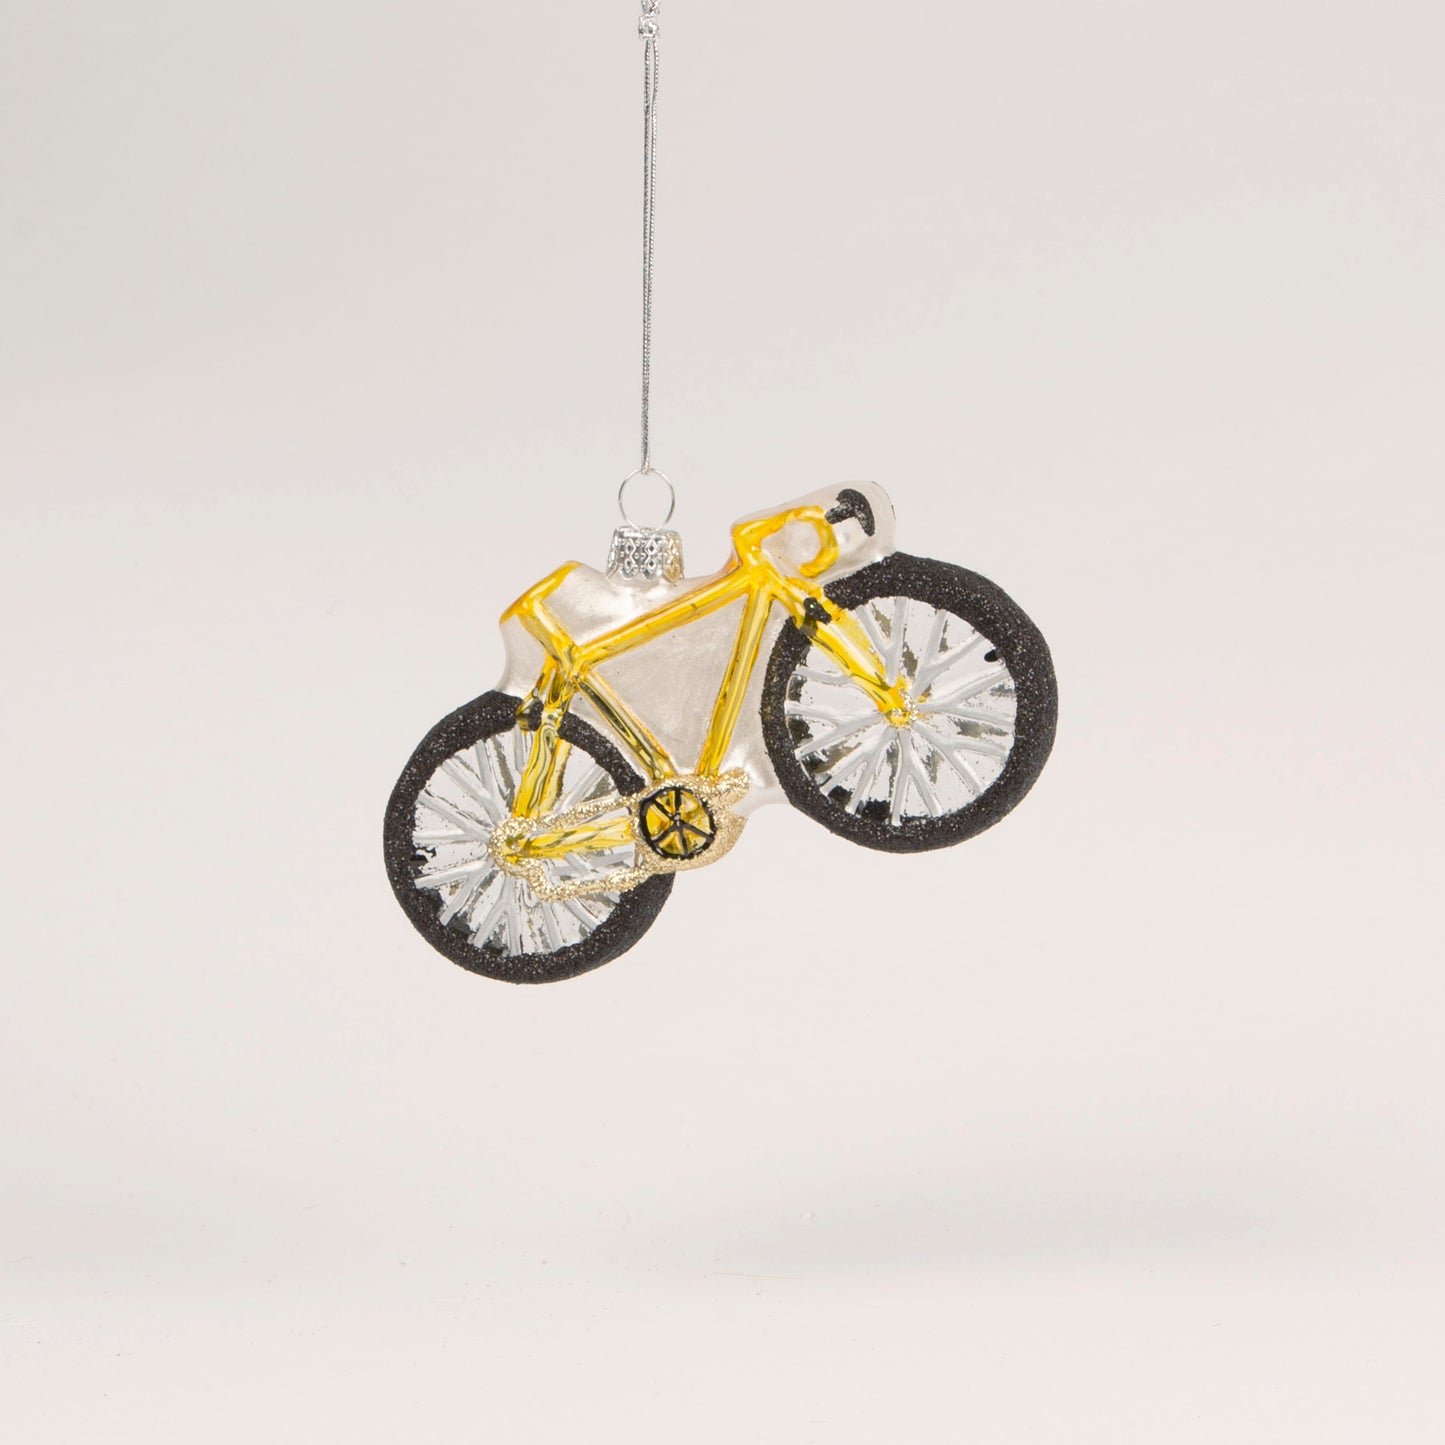 A gold bicycle Christmas decoration to be hung on your tree or in your home.